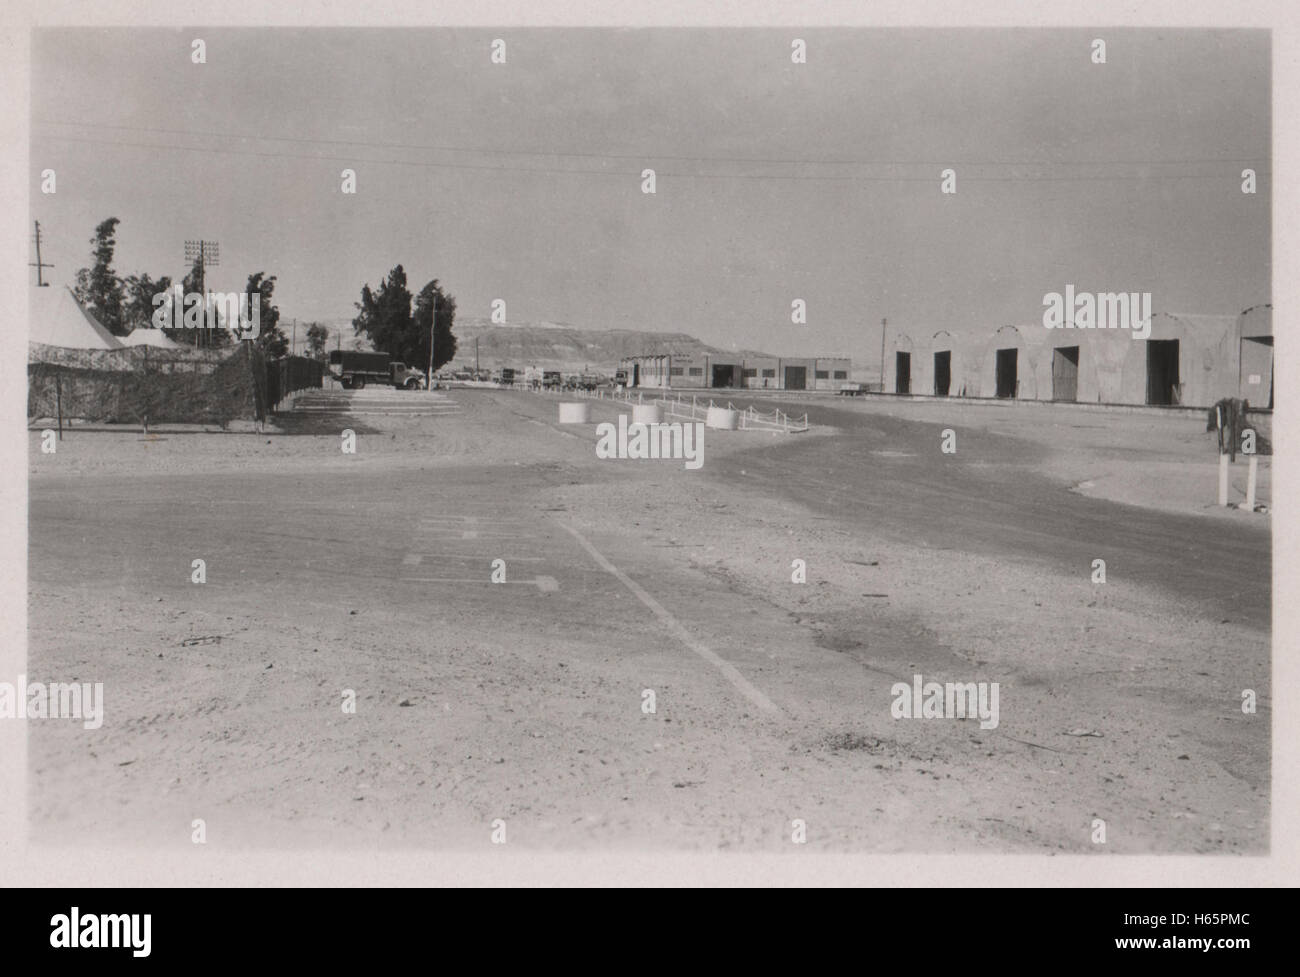 Maintenance sheds at 10 Base Ordnance Depot Royal Army Ordnance Corps (RAOC) camp at Geneifa Ismailia area near the Suez Canal 1952 in the period prior to withdrawal of British troops from the Suez Canal zone and the Suez Crisis. Stock Photo